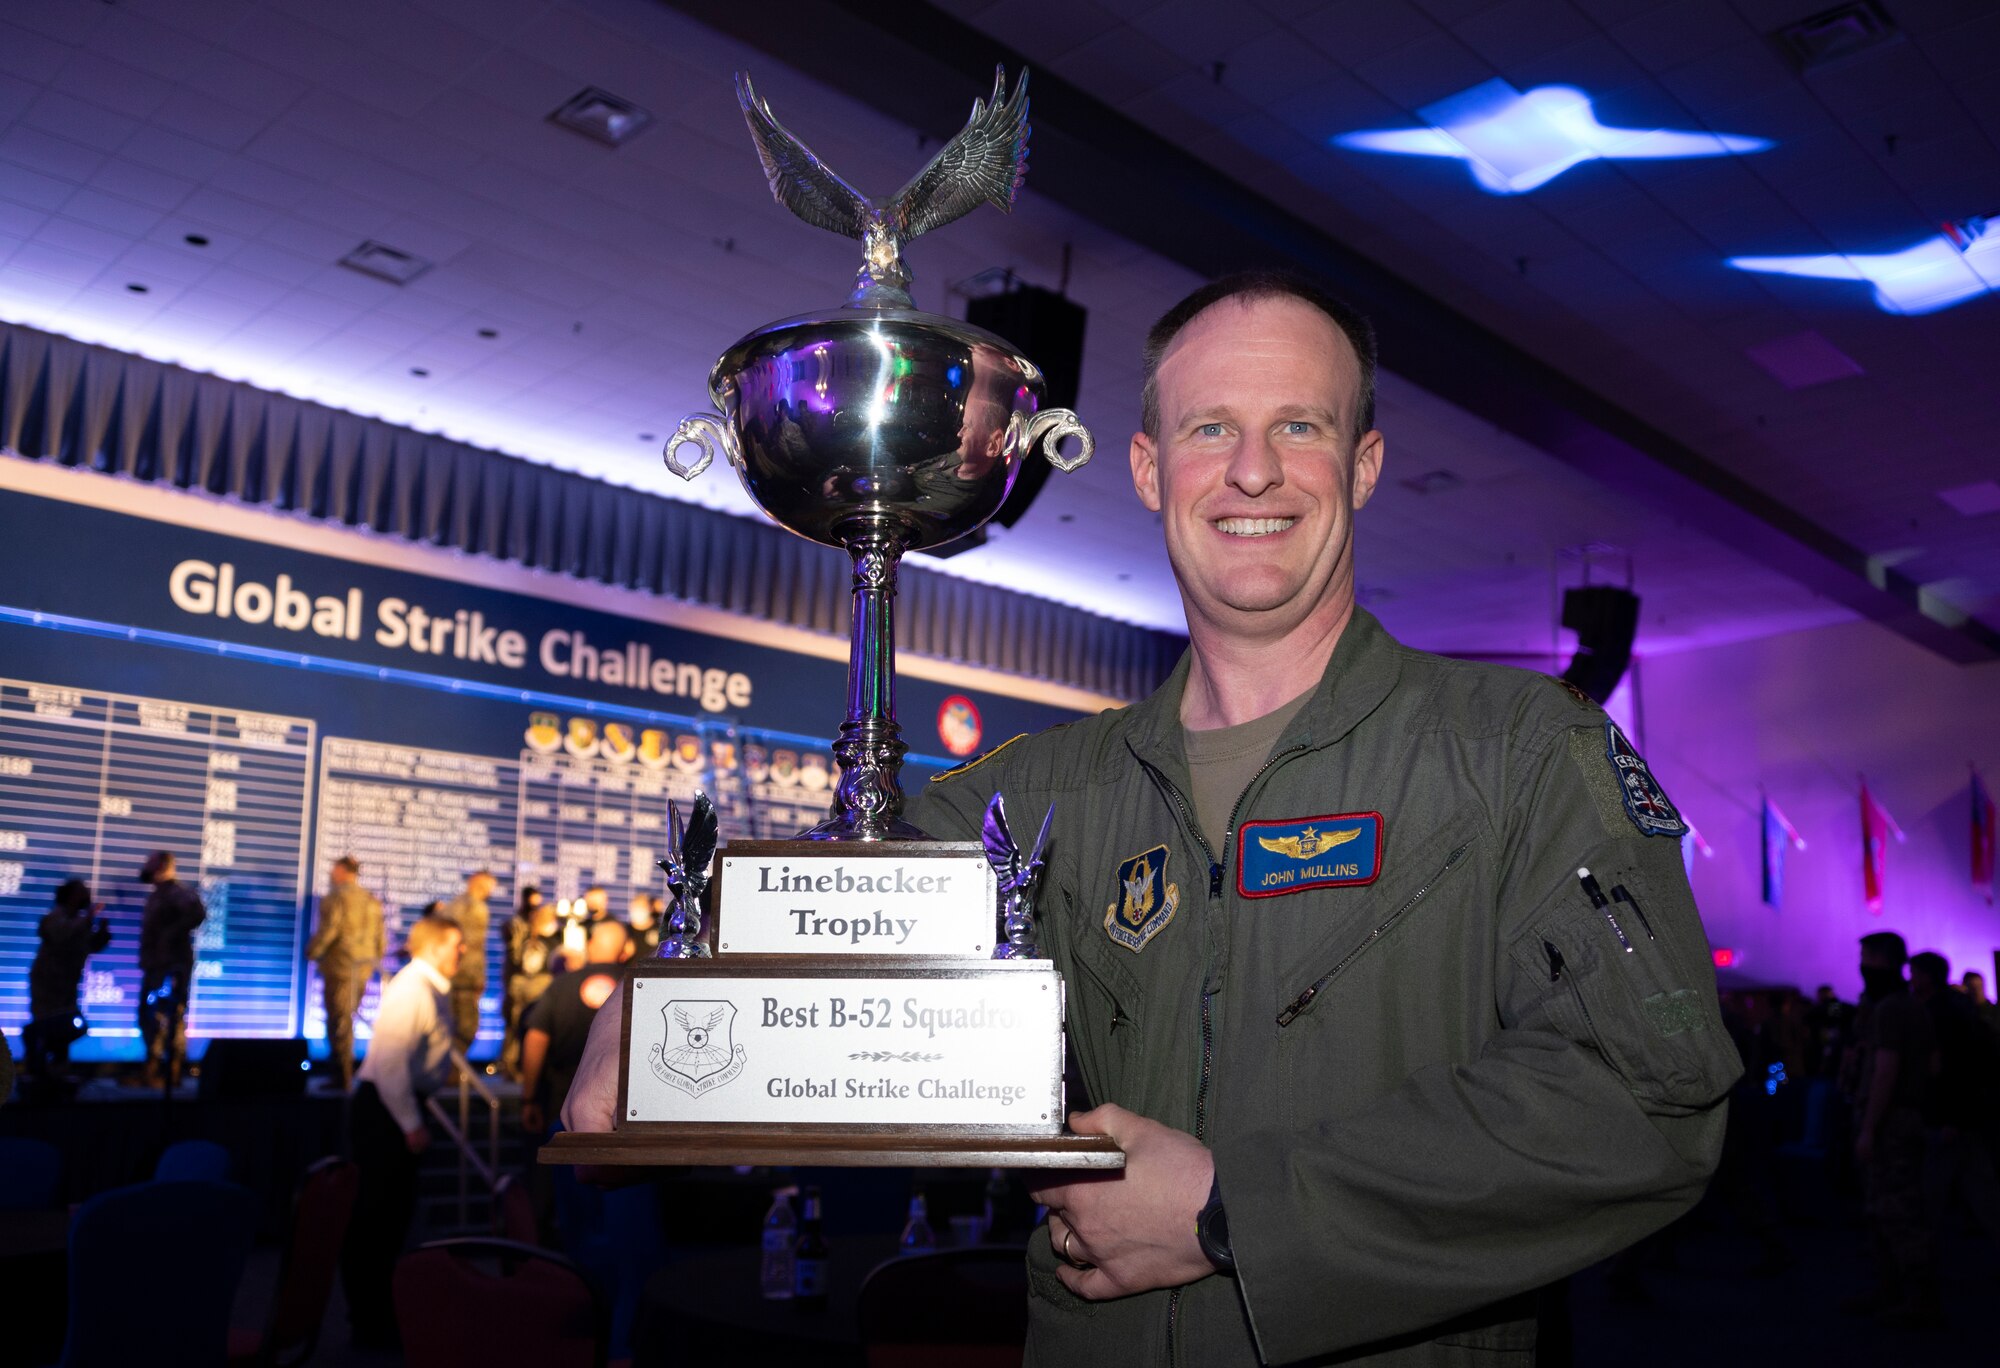 Photo of Airman holding trophy